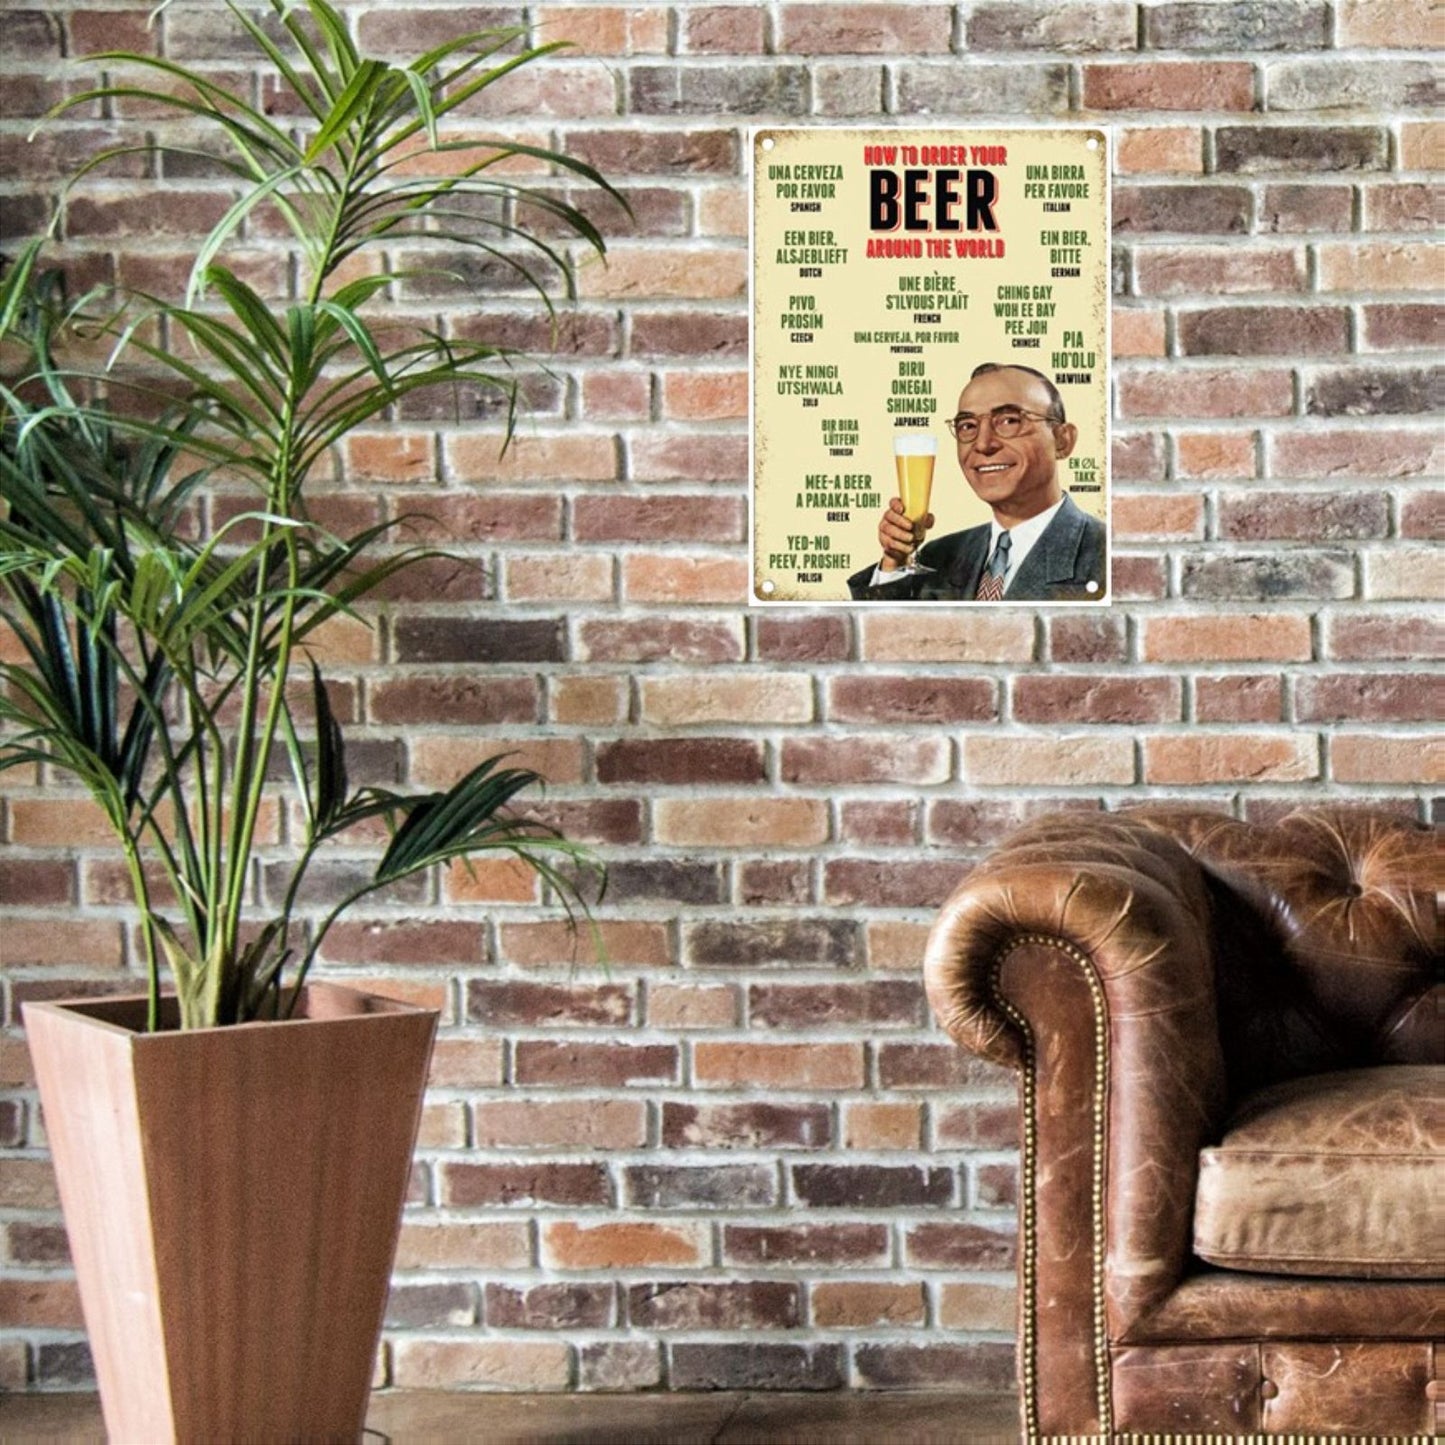 Large Metal Sign 60 x 49.5cm Beer How to Order your Beer